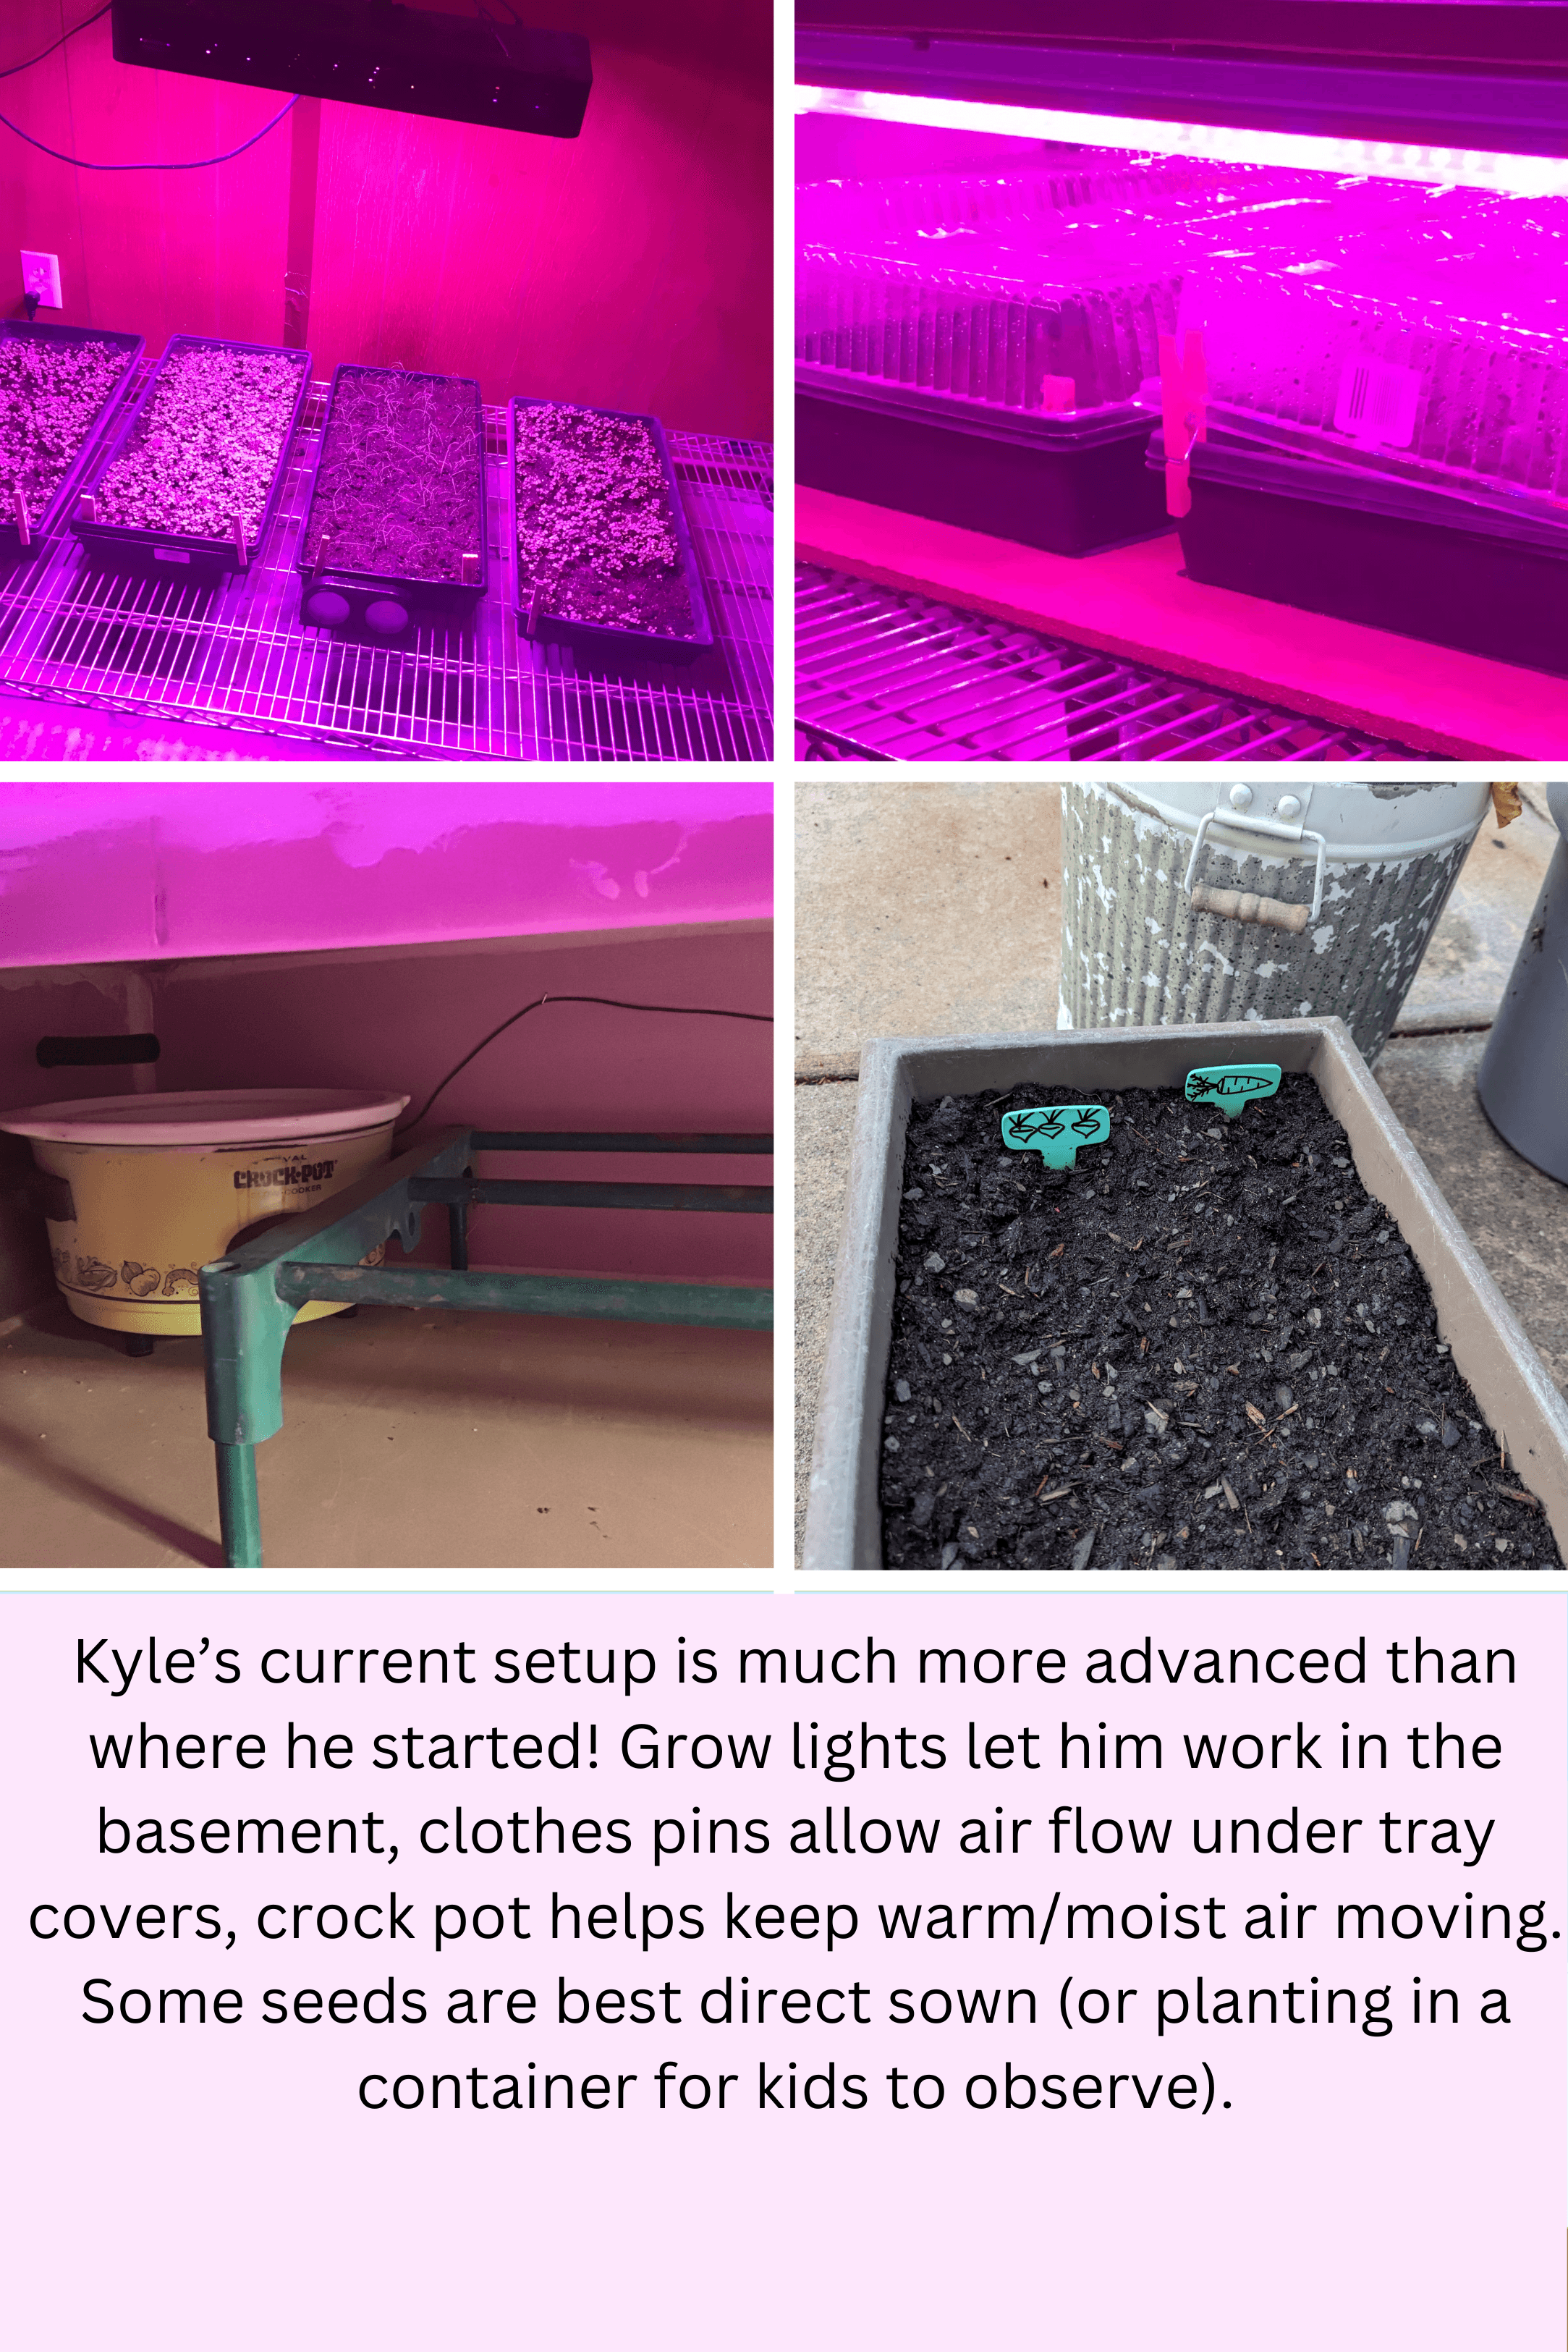 seed starting under grow lights, caption reads: Kyle’s current setup is much more advanced than where he started! Grow lights let him work in the basement, clothes pins allow air flow under tray covers, crock pot helps keep warm/moist air moving. Some see